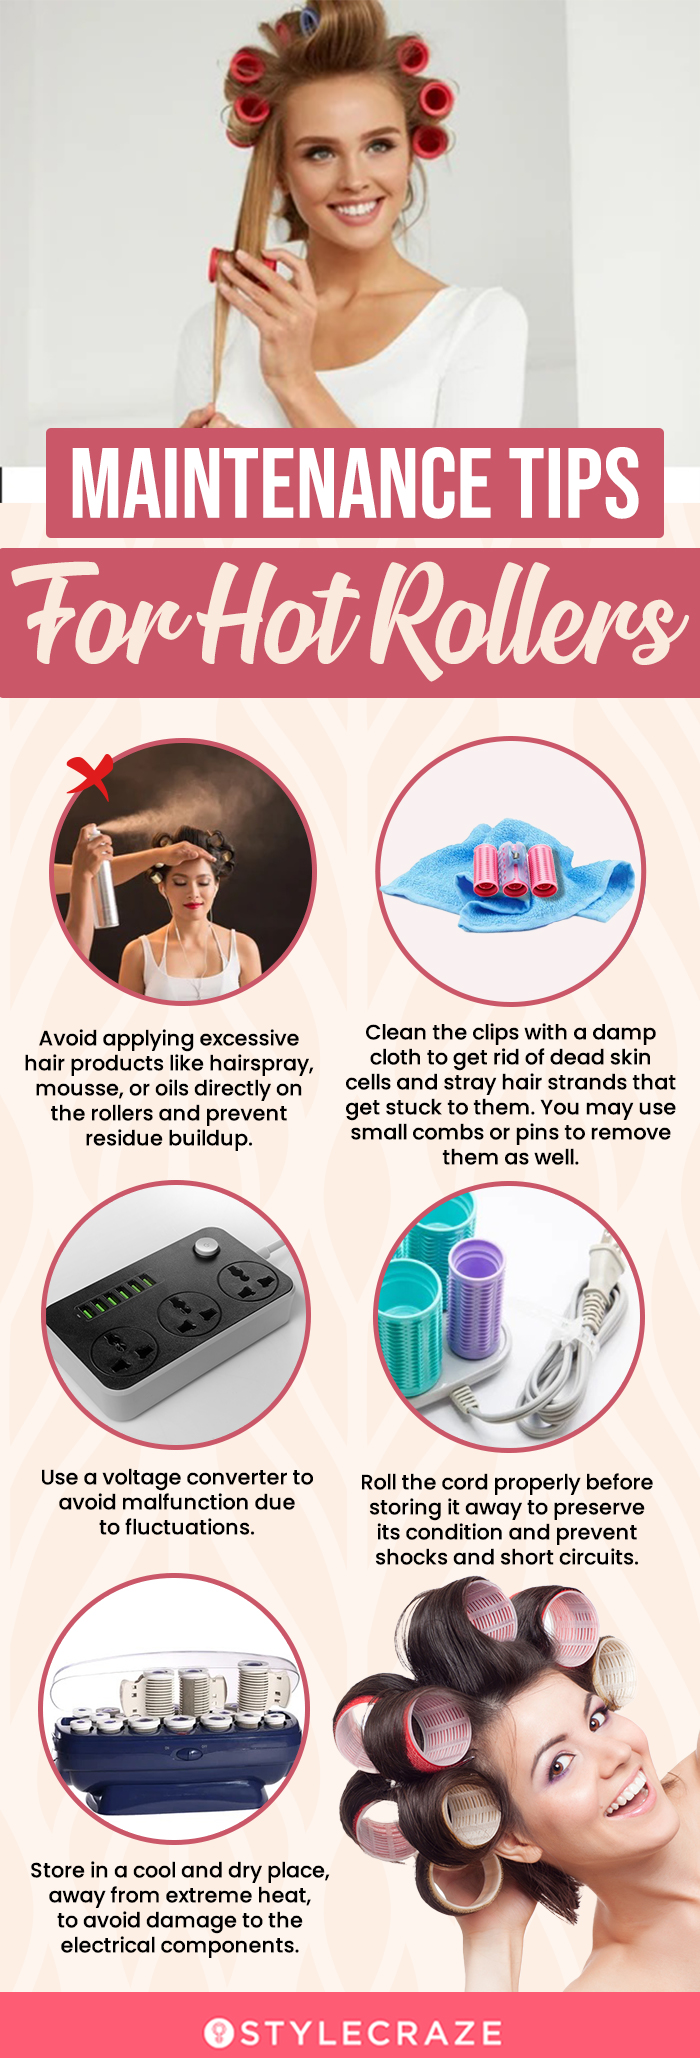 Maintenance Tips For Hot Rollers (infographic)